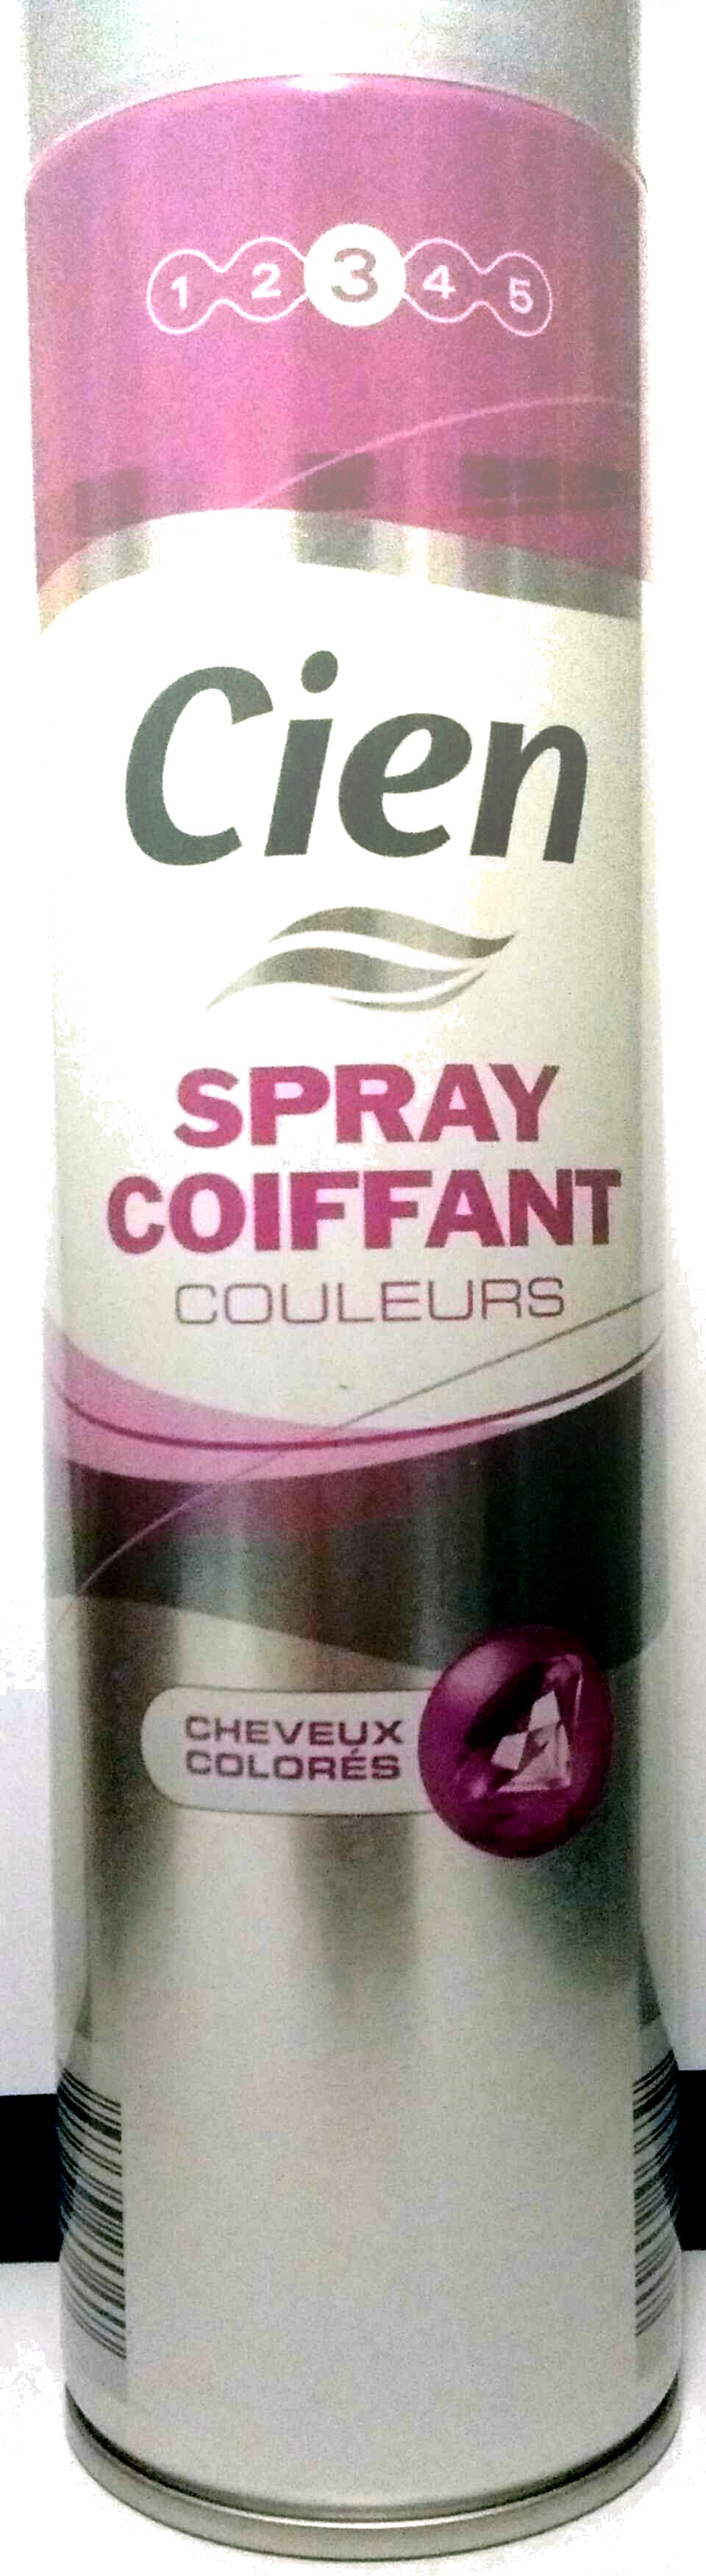 Spray coiffant couleurs - Product - fr